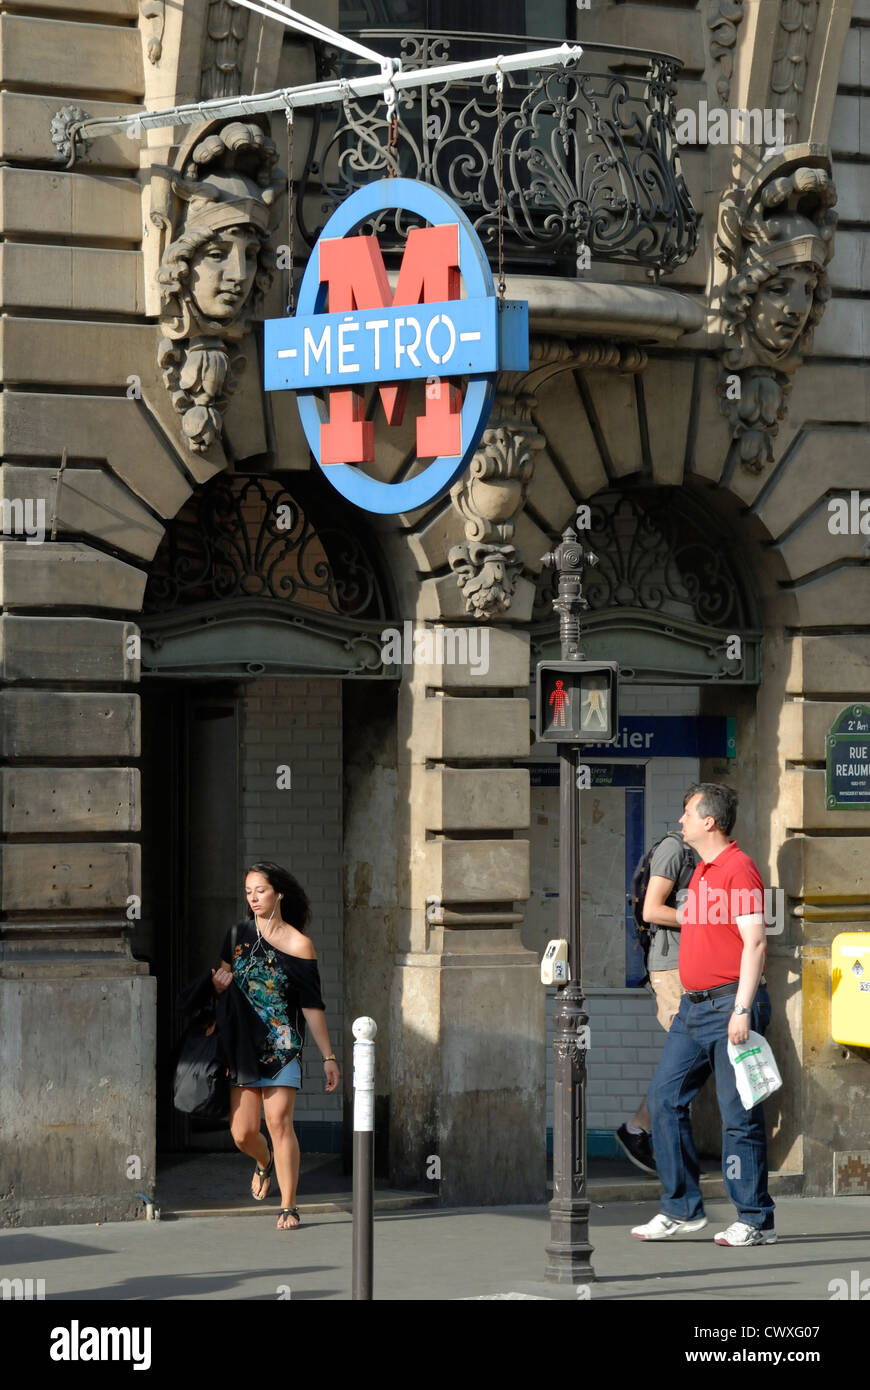 Paris, France. Sentier metro station - unique red and blue Metro sign. Only two signs of this design were ever made. The other.. Stock Photo